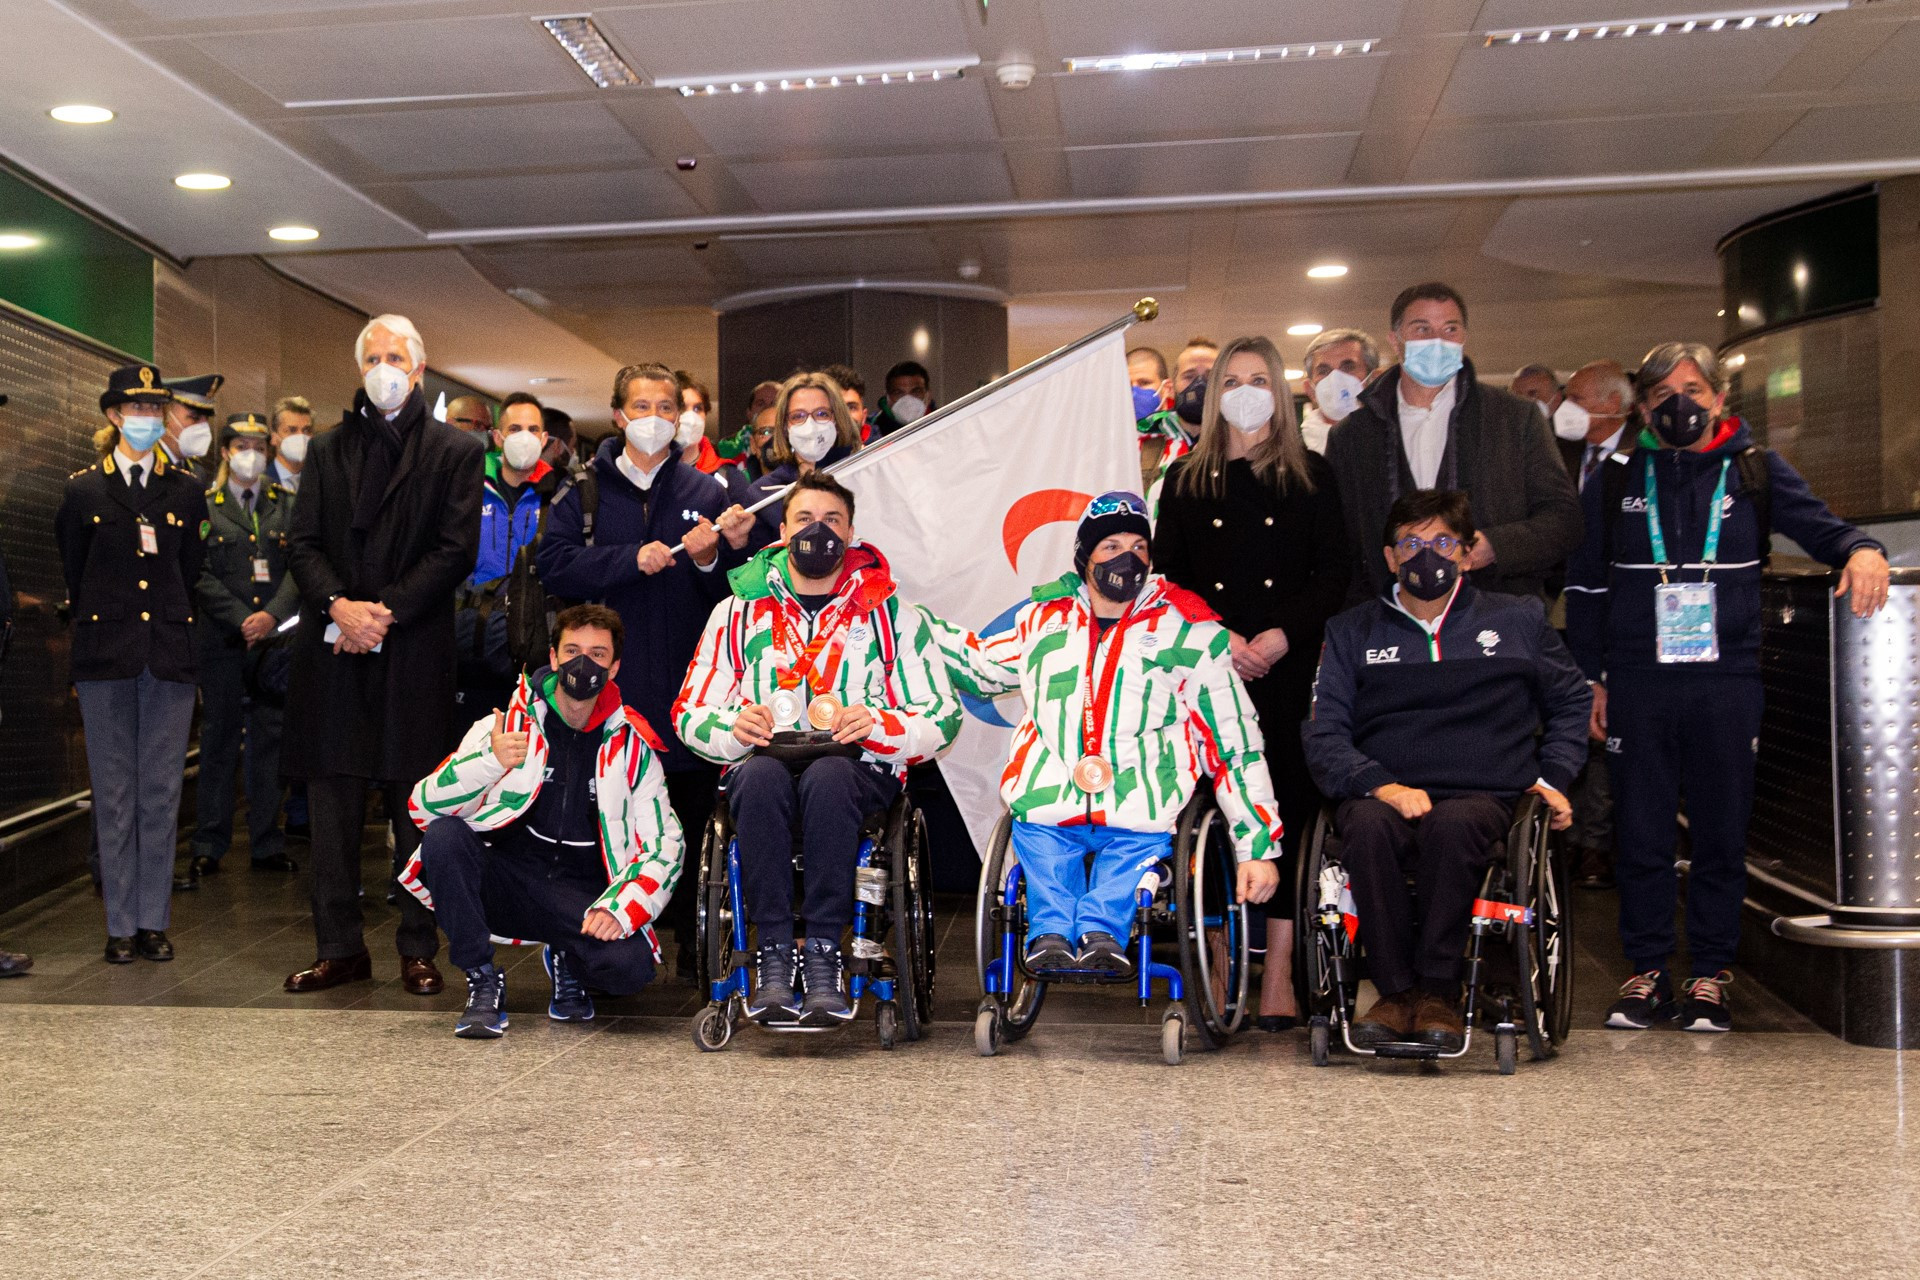 Paralympic Flag arrives in Milan from Beijing 2022 as symbol in "darkest times"